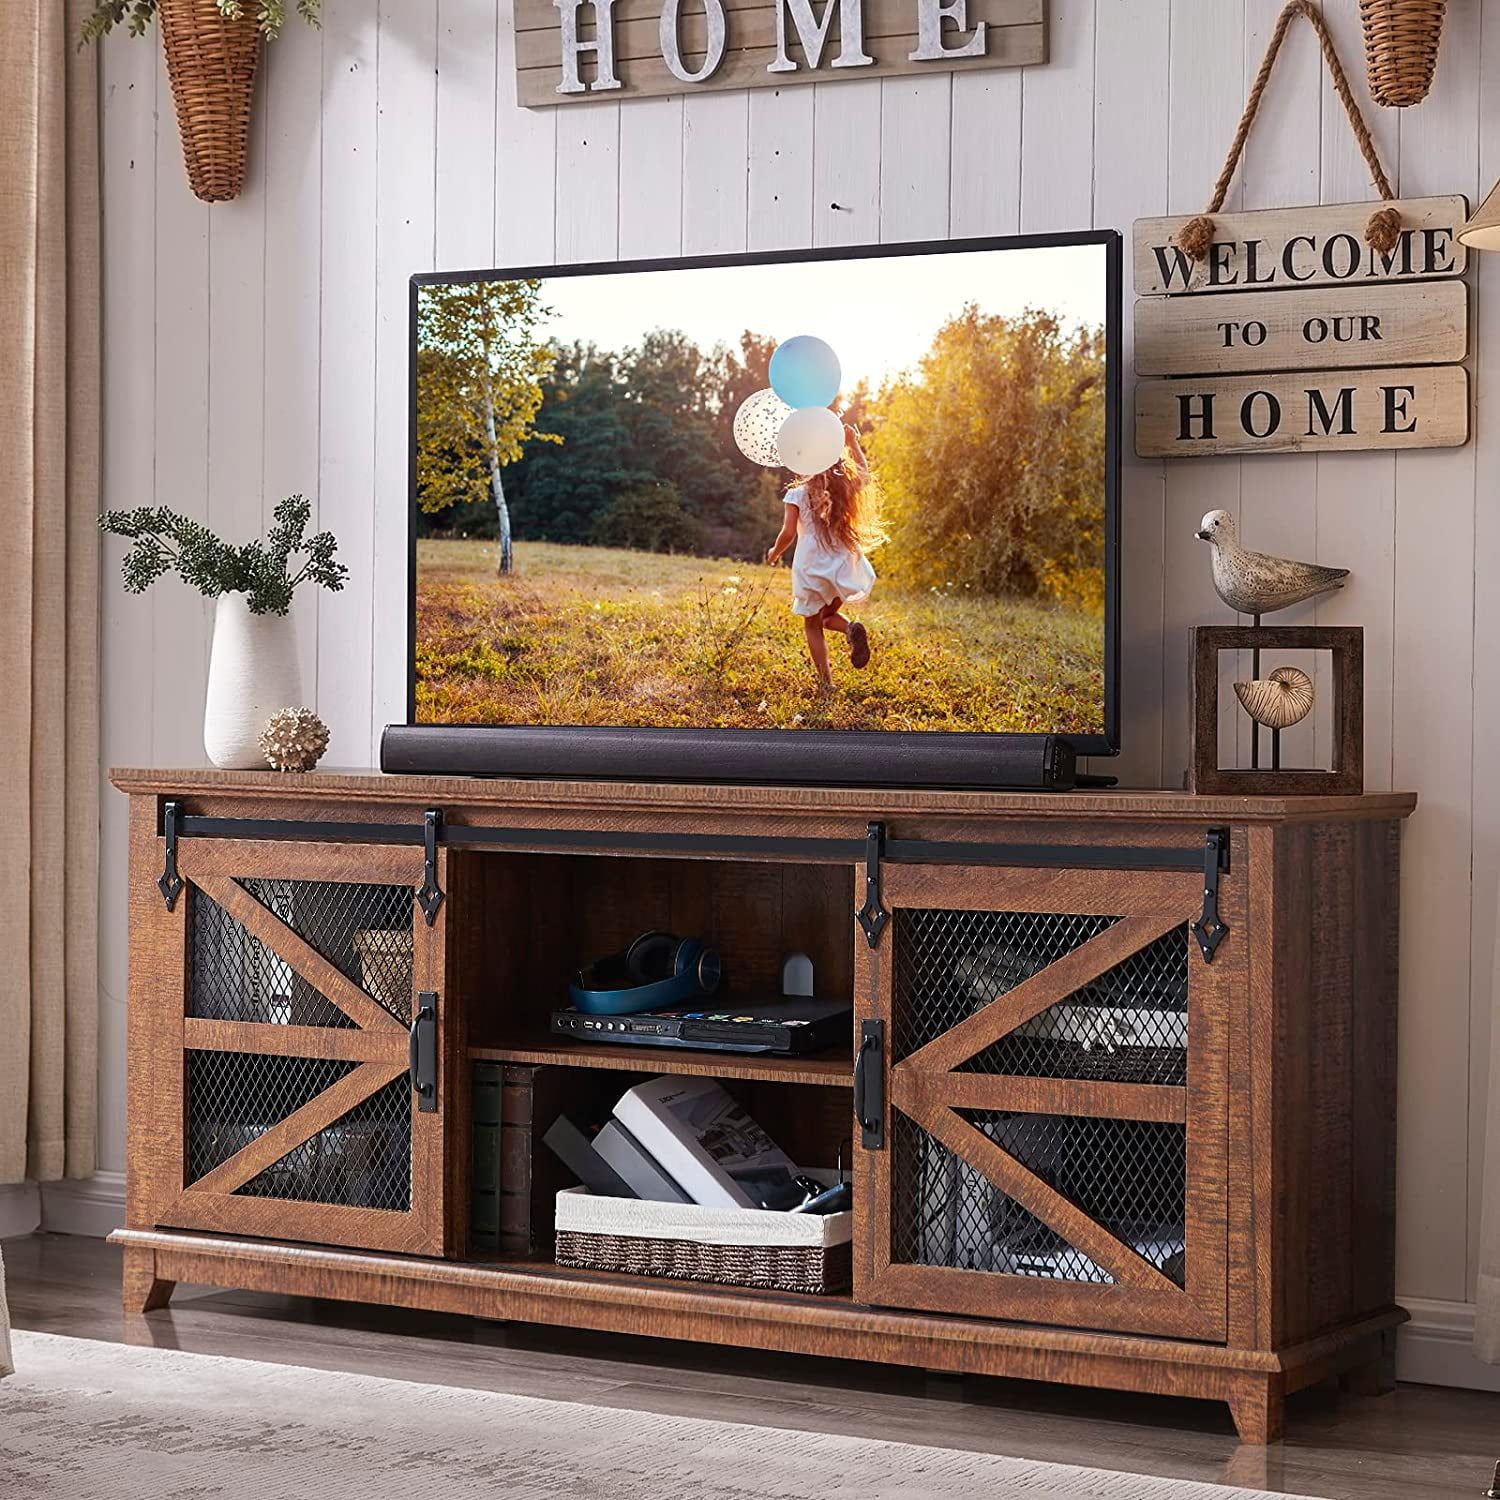 Okd Farmhouse Tv Stand For 75+ Inch Tv, Entertainment Center With  Adjustable Shelves For Living Room, Reclaimed Barnwood – Walmart Intended For Farmhouse Stands With Shelves (Photo 5 of 15)